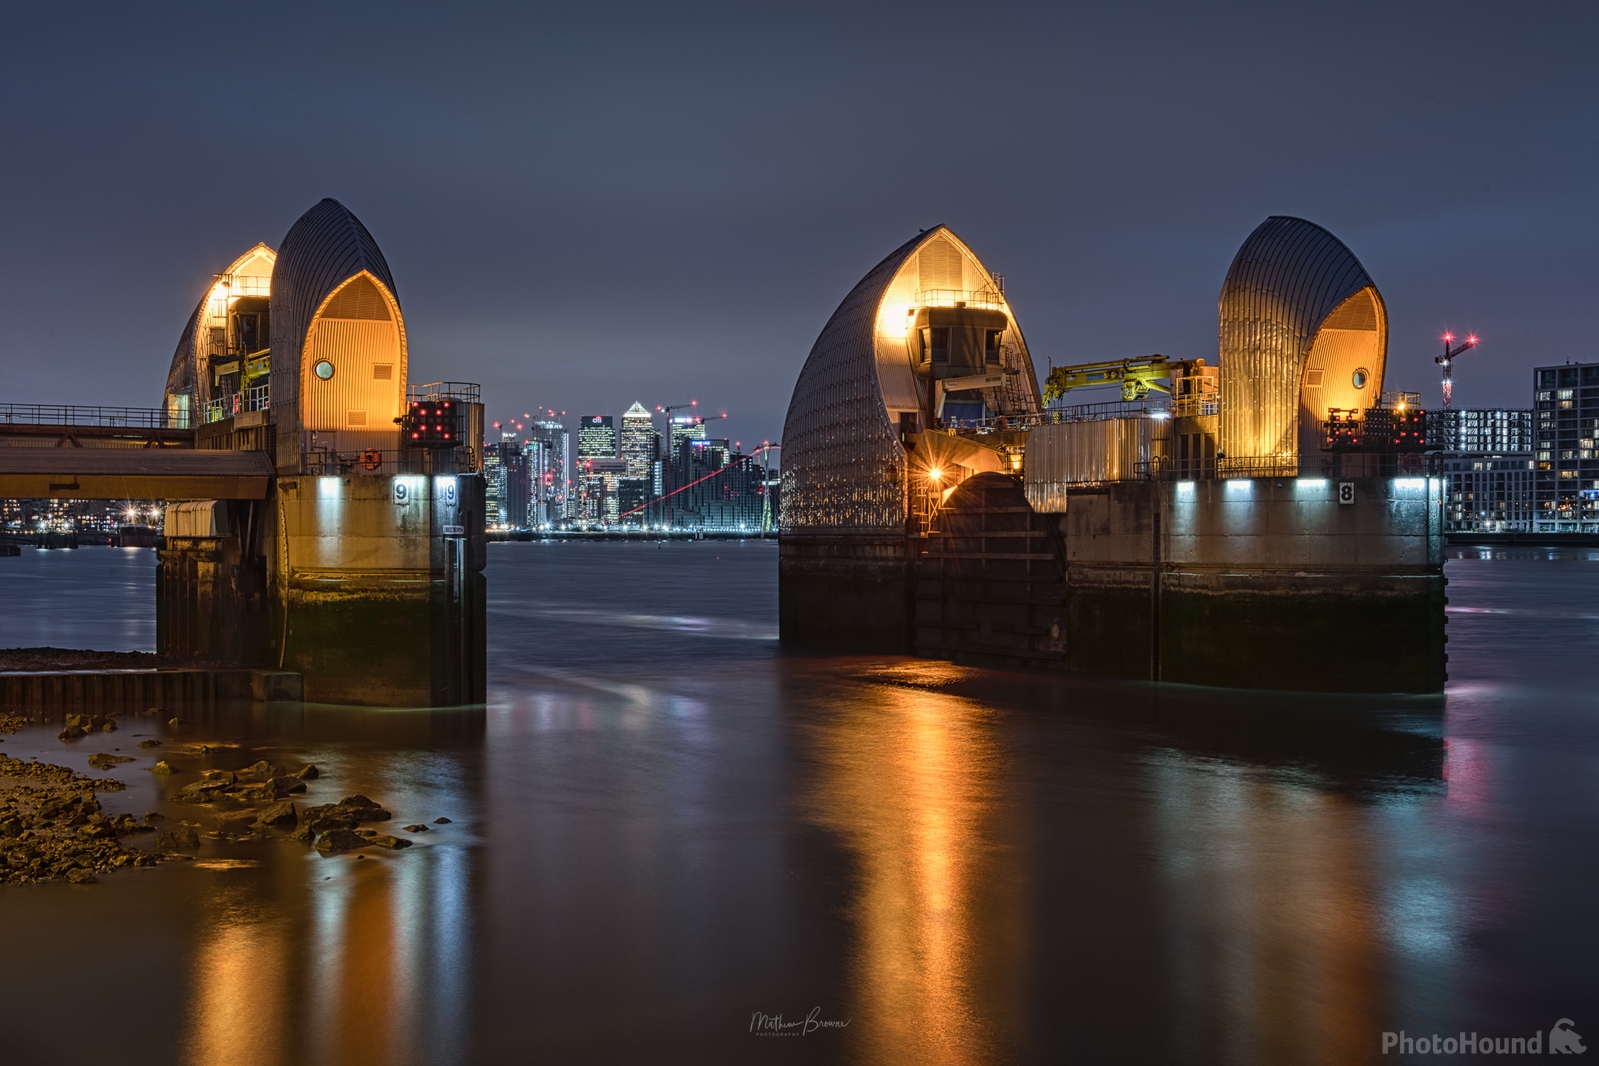 Image of Thames Barrier by Mathew Browne